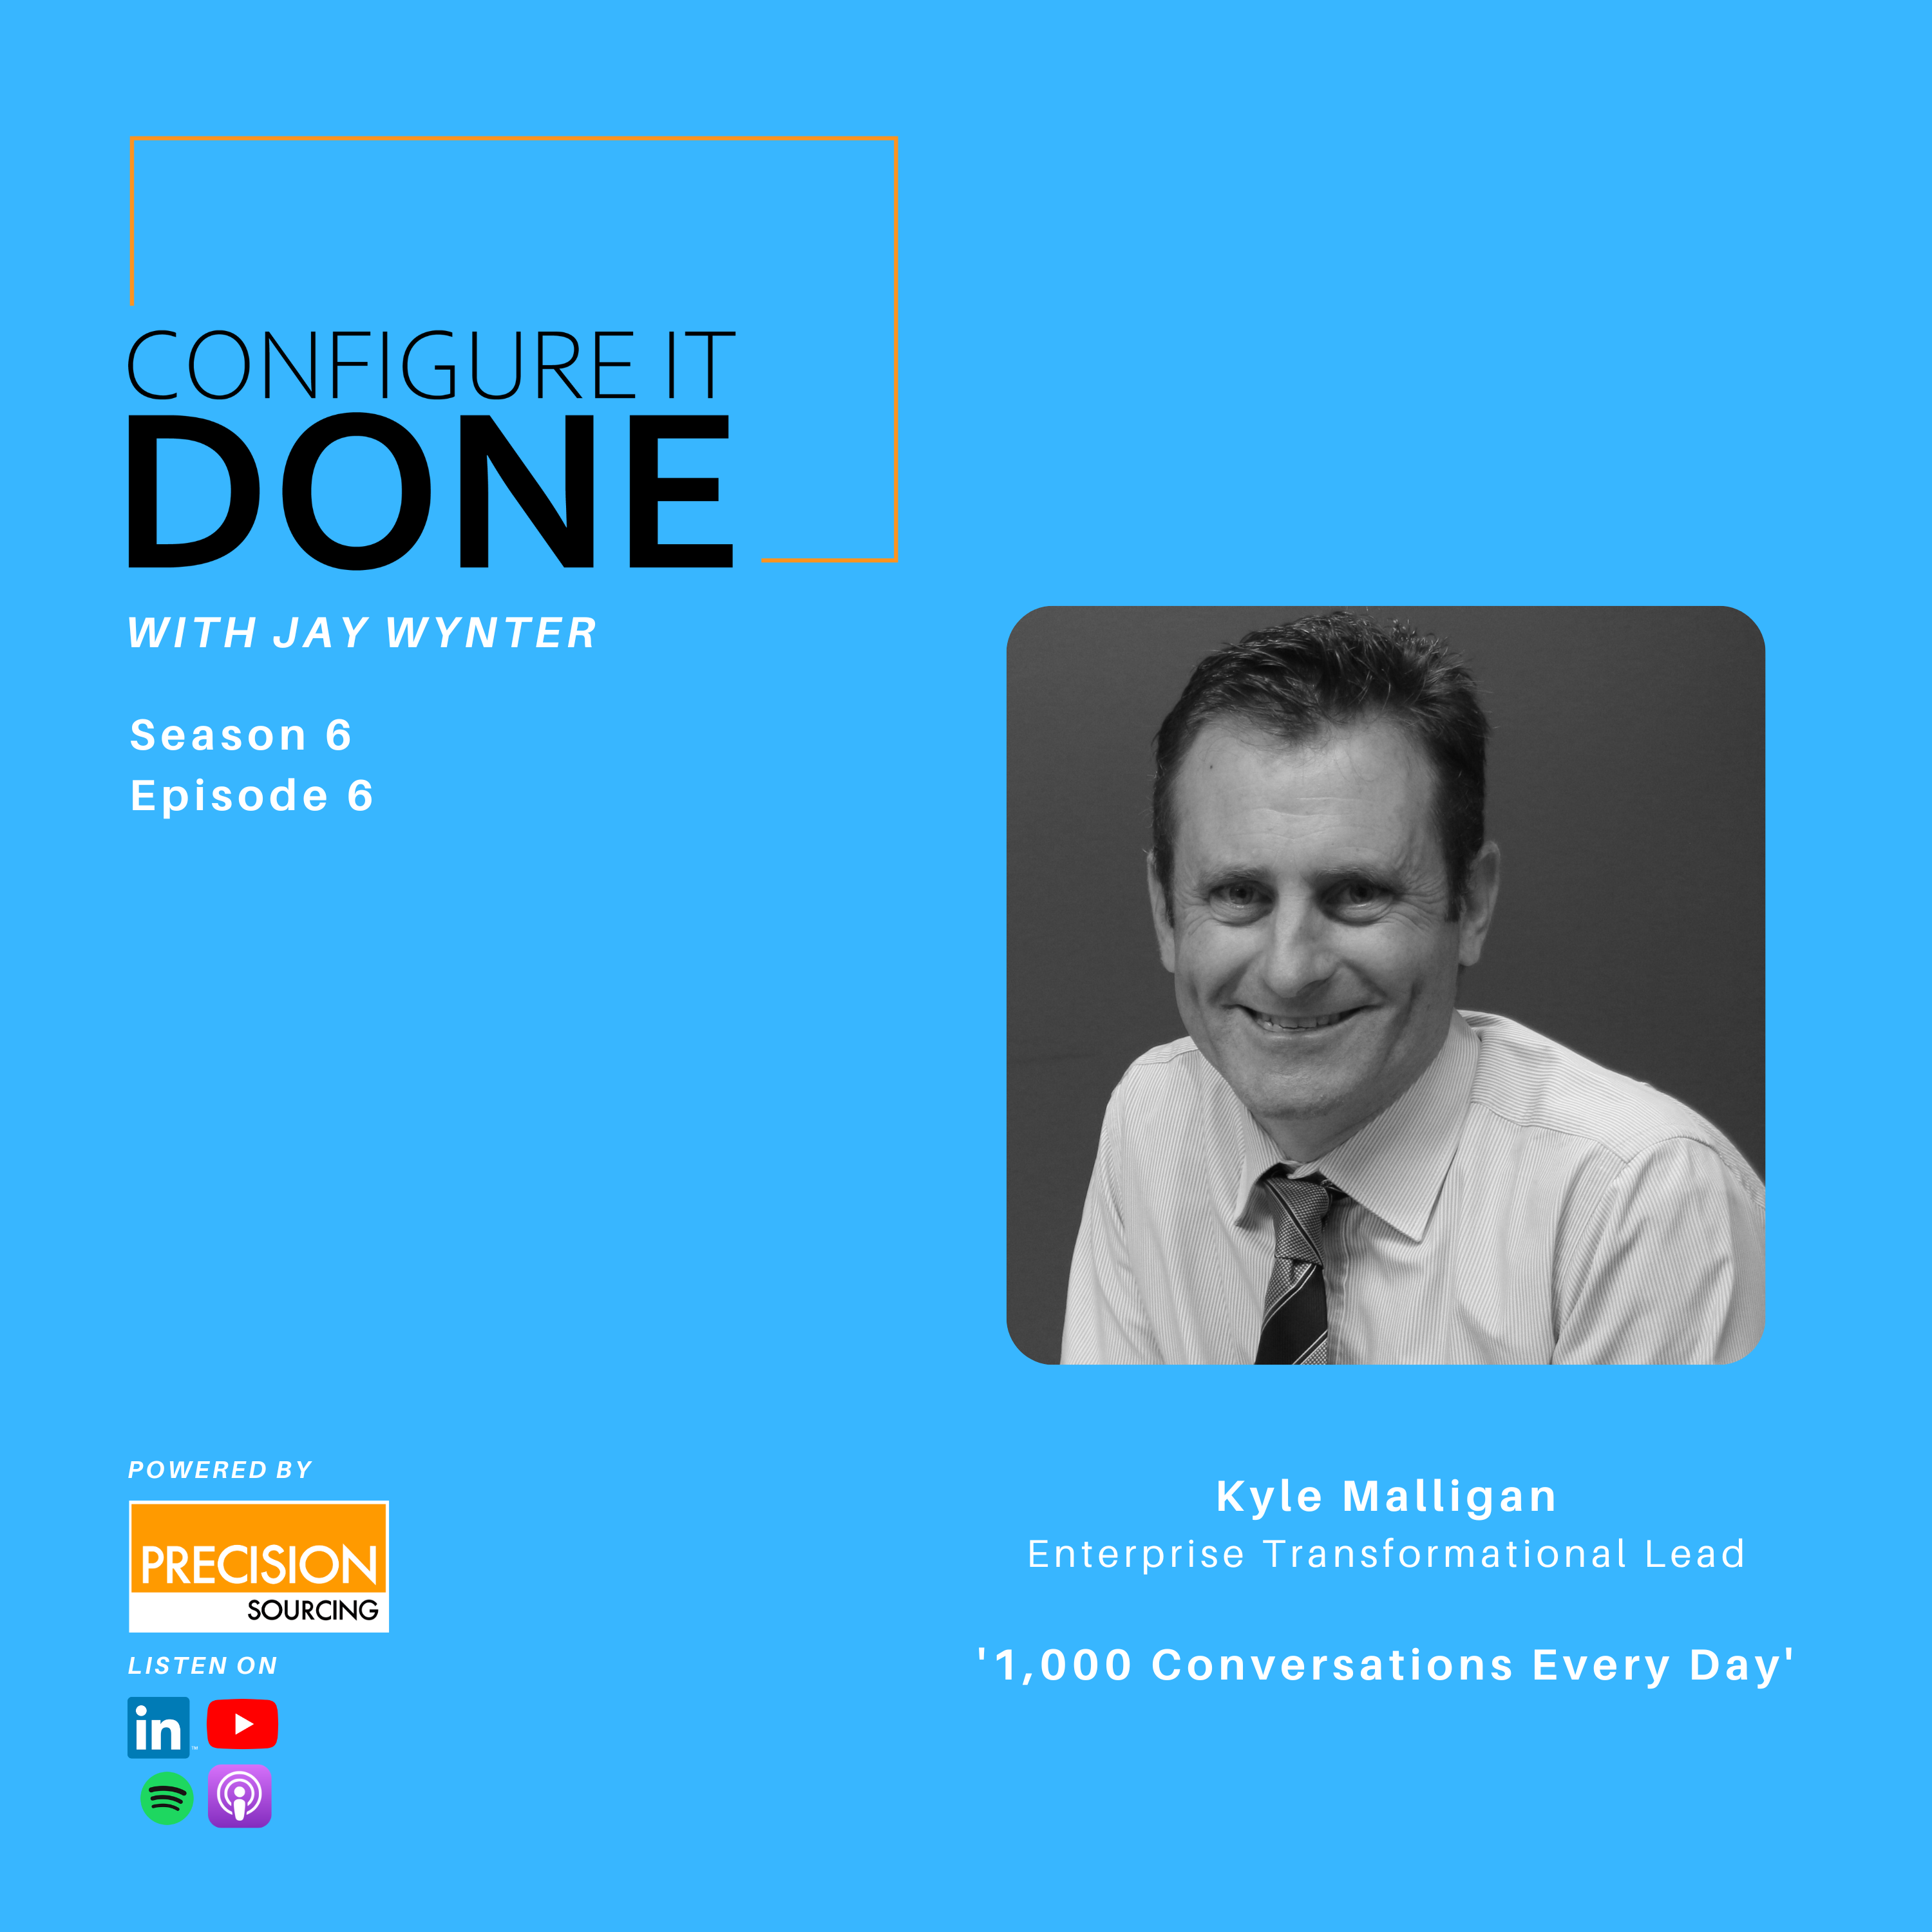 1,000 Conversations Every Day With Kyle Malligan